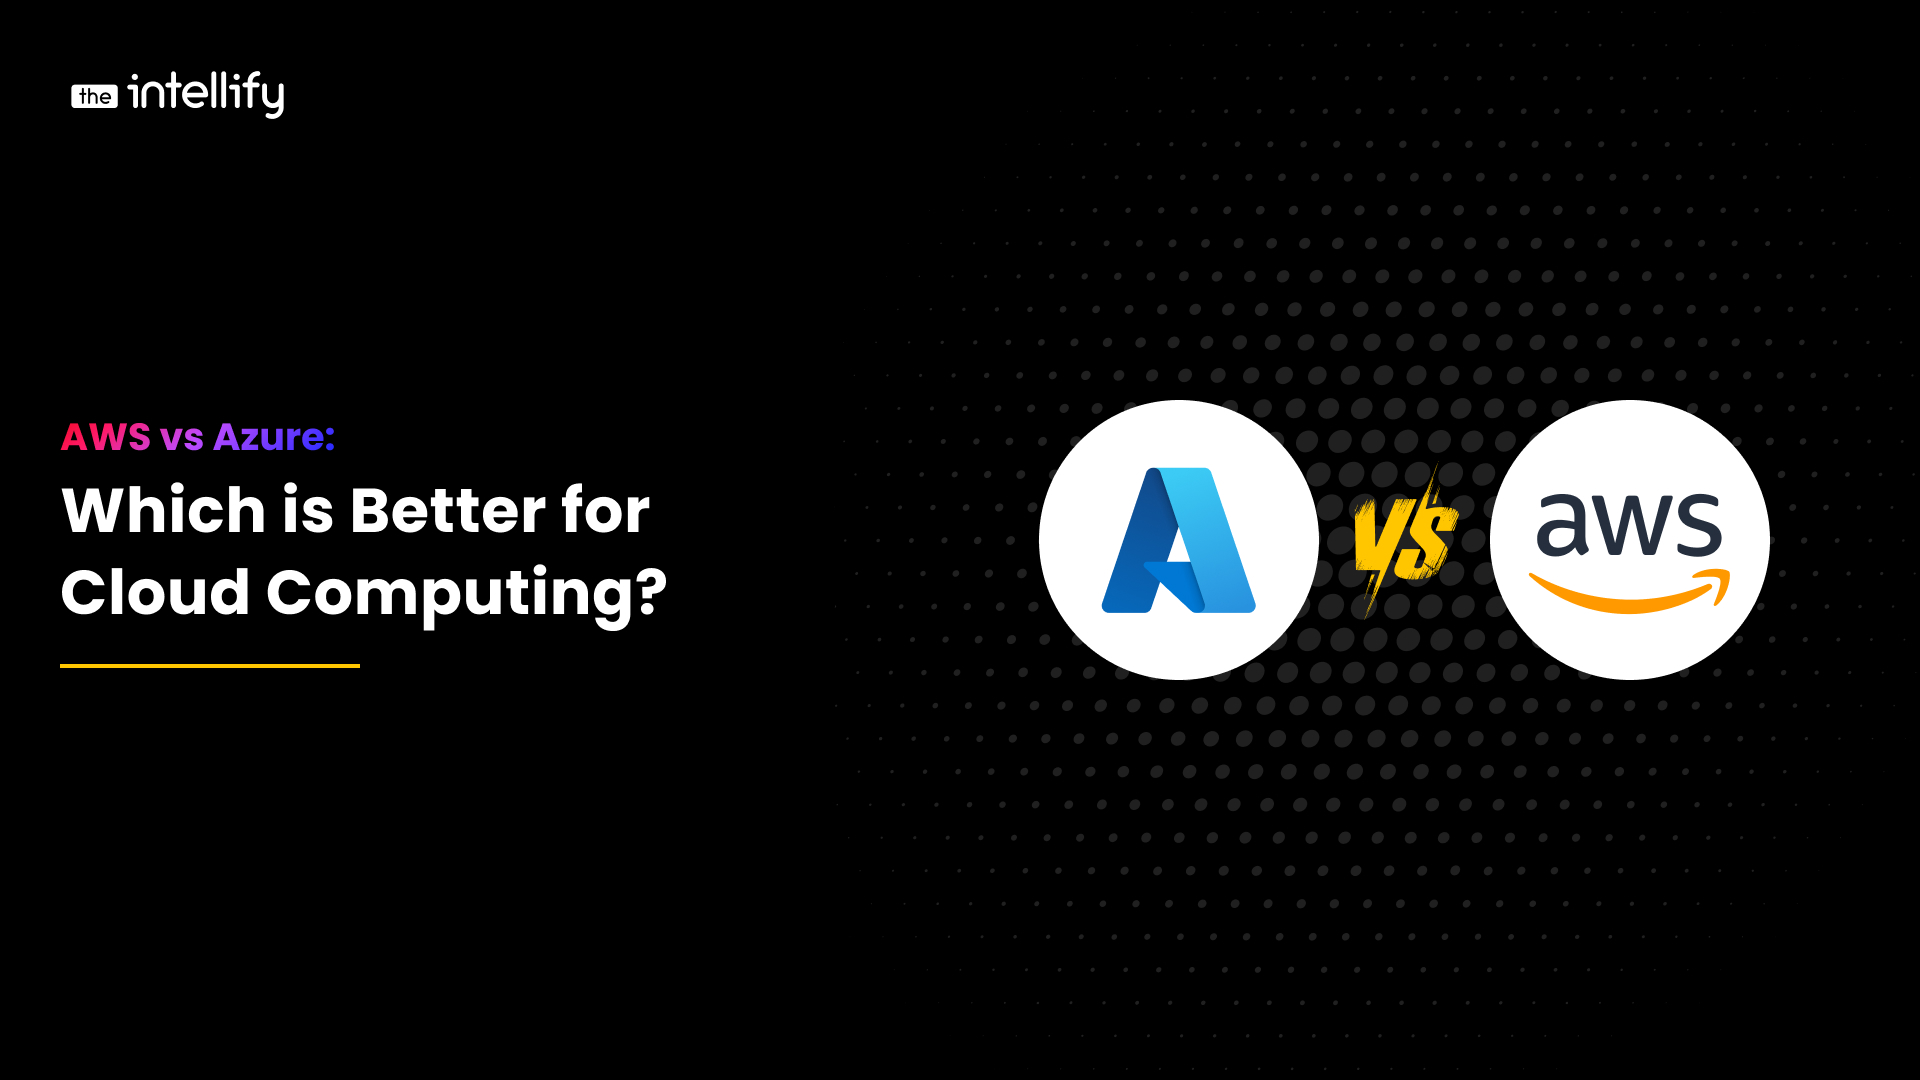 AWS vs Azure: Which is Better for Cloud Computing?